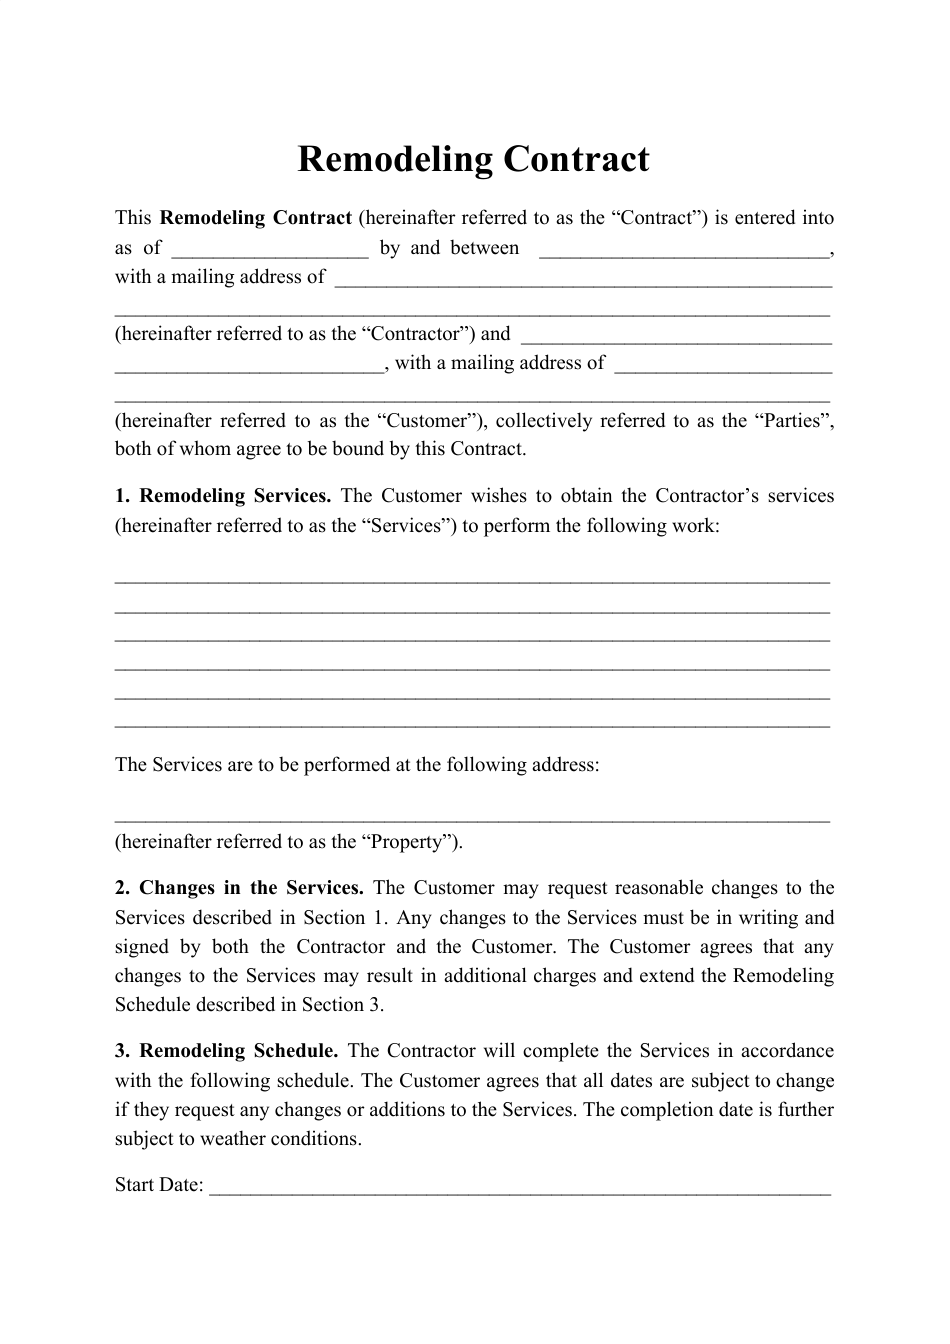 Remodeling Contract Template, Page 1